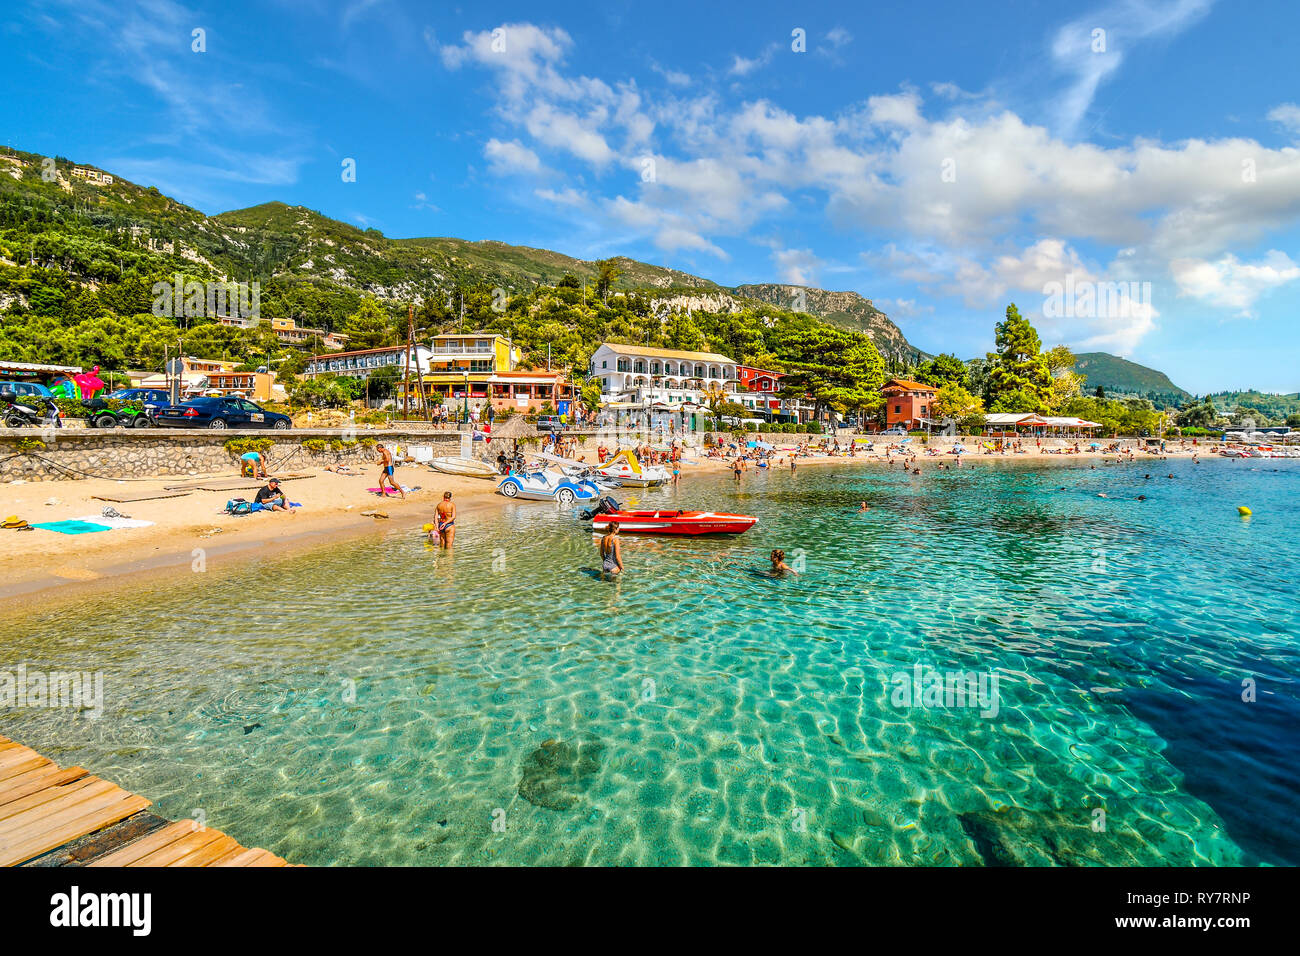 Tourists relax in the clear turquoise waters and on the sandy Palaiokastritsa beach on the Aegean island of Corfu, Greece. Stock Photo